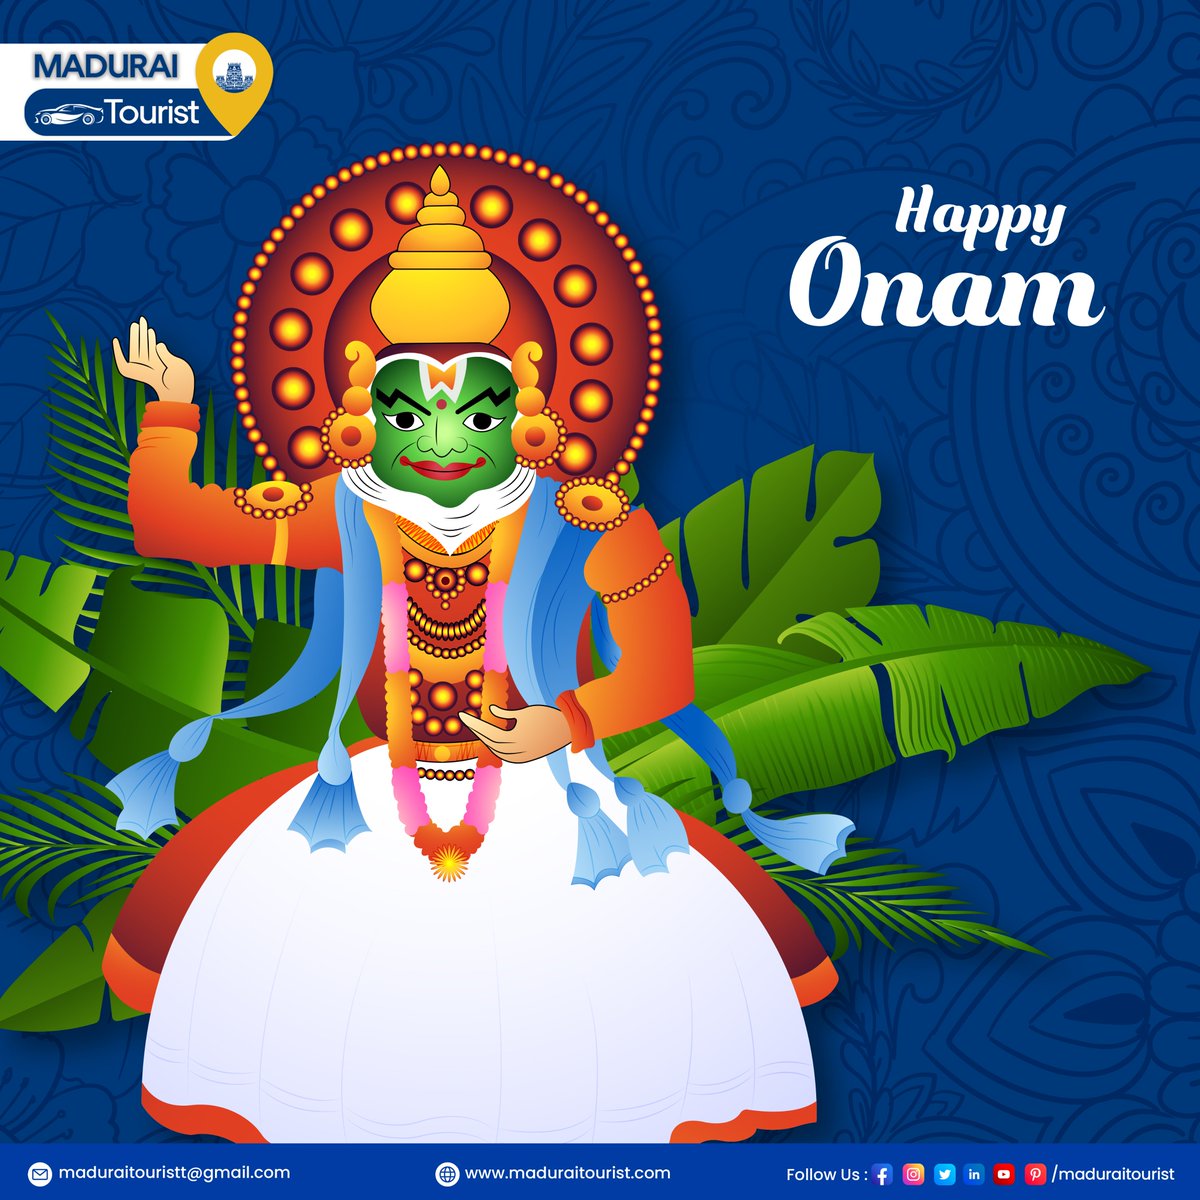 May your Onam be bright and joyful, brimming with happiness and prosperity! May this festive season bring knowledge and cherished moments as you celebrate with loved ones. 🌼🌈 #HappyOnam #maduraitourist #letsconnect #onam #onam2023 #onamfestival #onamcelebration #onamspecial